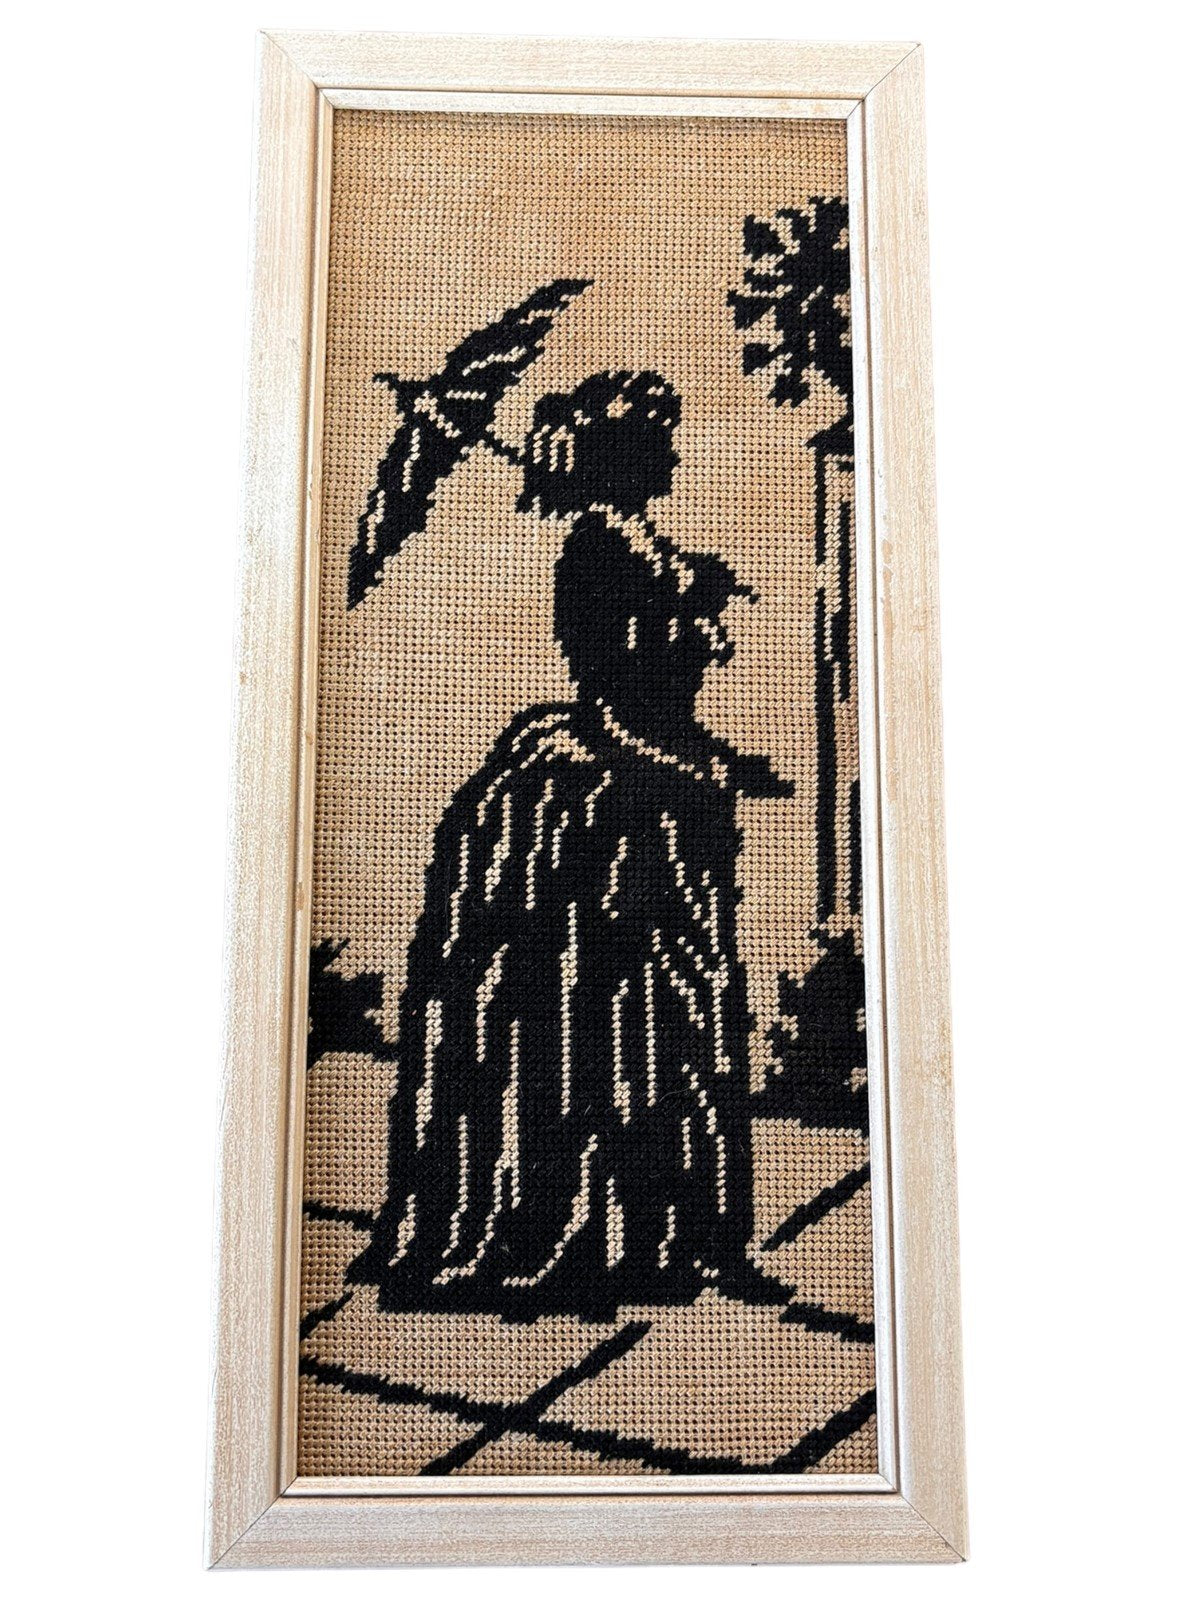 Regency Lady and Gentleman Silhouettes Black Embroidered